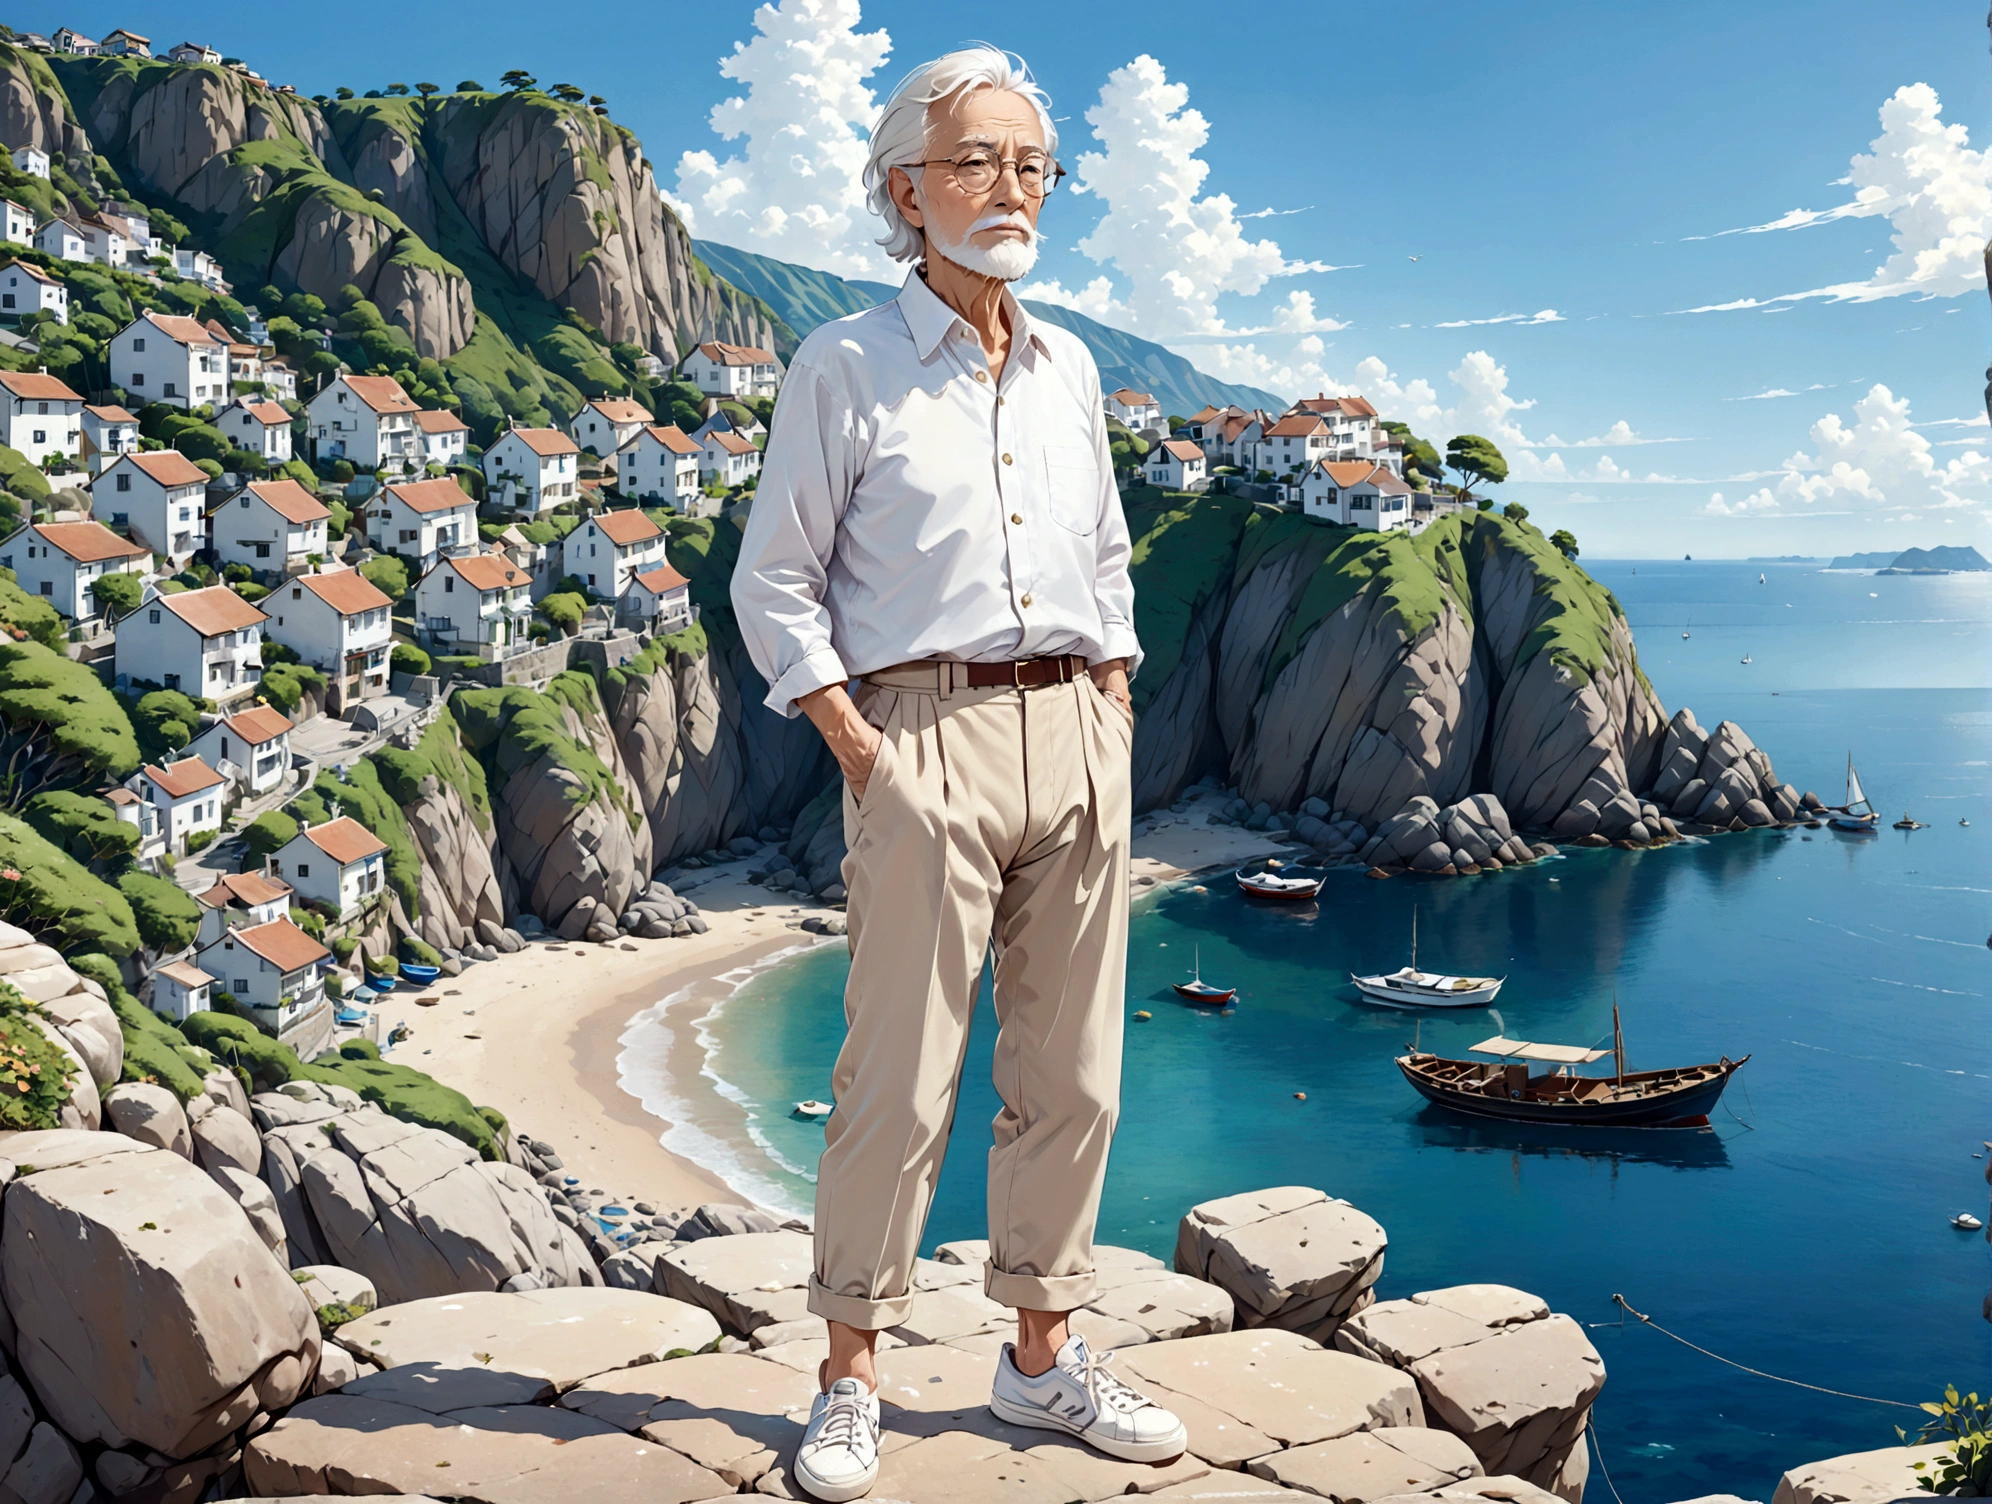 Create a high-quality anime-style image featuring an elderly man standing on a rocky cliff by the sea. The man has white hair, a beard, and is wearing round glasses. He is dressed in a white shirt, beige pants rolled up at the ankles, and white sneakers. His posture is relaxed, with his hands in his pockets, gazing thoughtfully into the distance.

The background consists of a clear blue sky filled with fluffy, white clouds. Below the cliff, there is a calm sea with boats and a small coastal village nestled at the foot of green, mountainous terrain. The scene captures a peaceful, reflective moment, with vibrant colors and detailed shading to emphasize the tranquil and contemplative atmosphere.